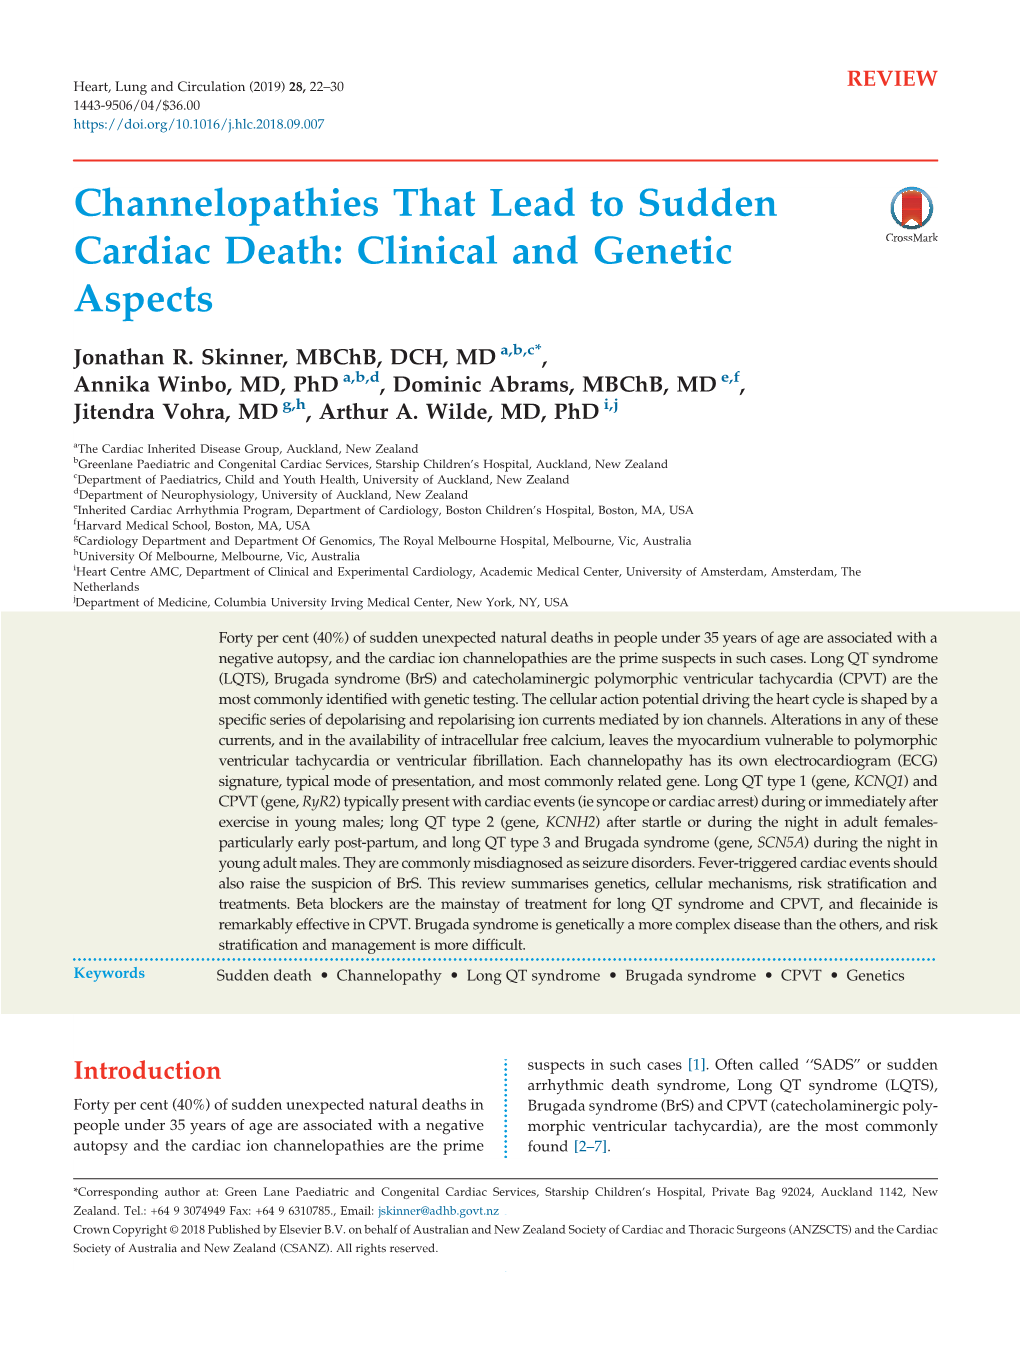 Channelopathies That Lead to Sudden Cardiac Death: Clinical and Genetic Aspects